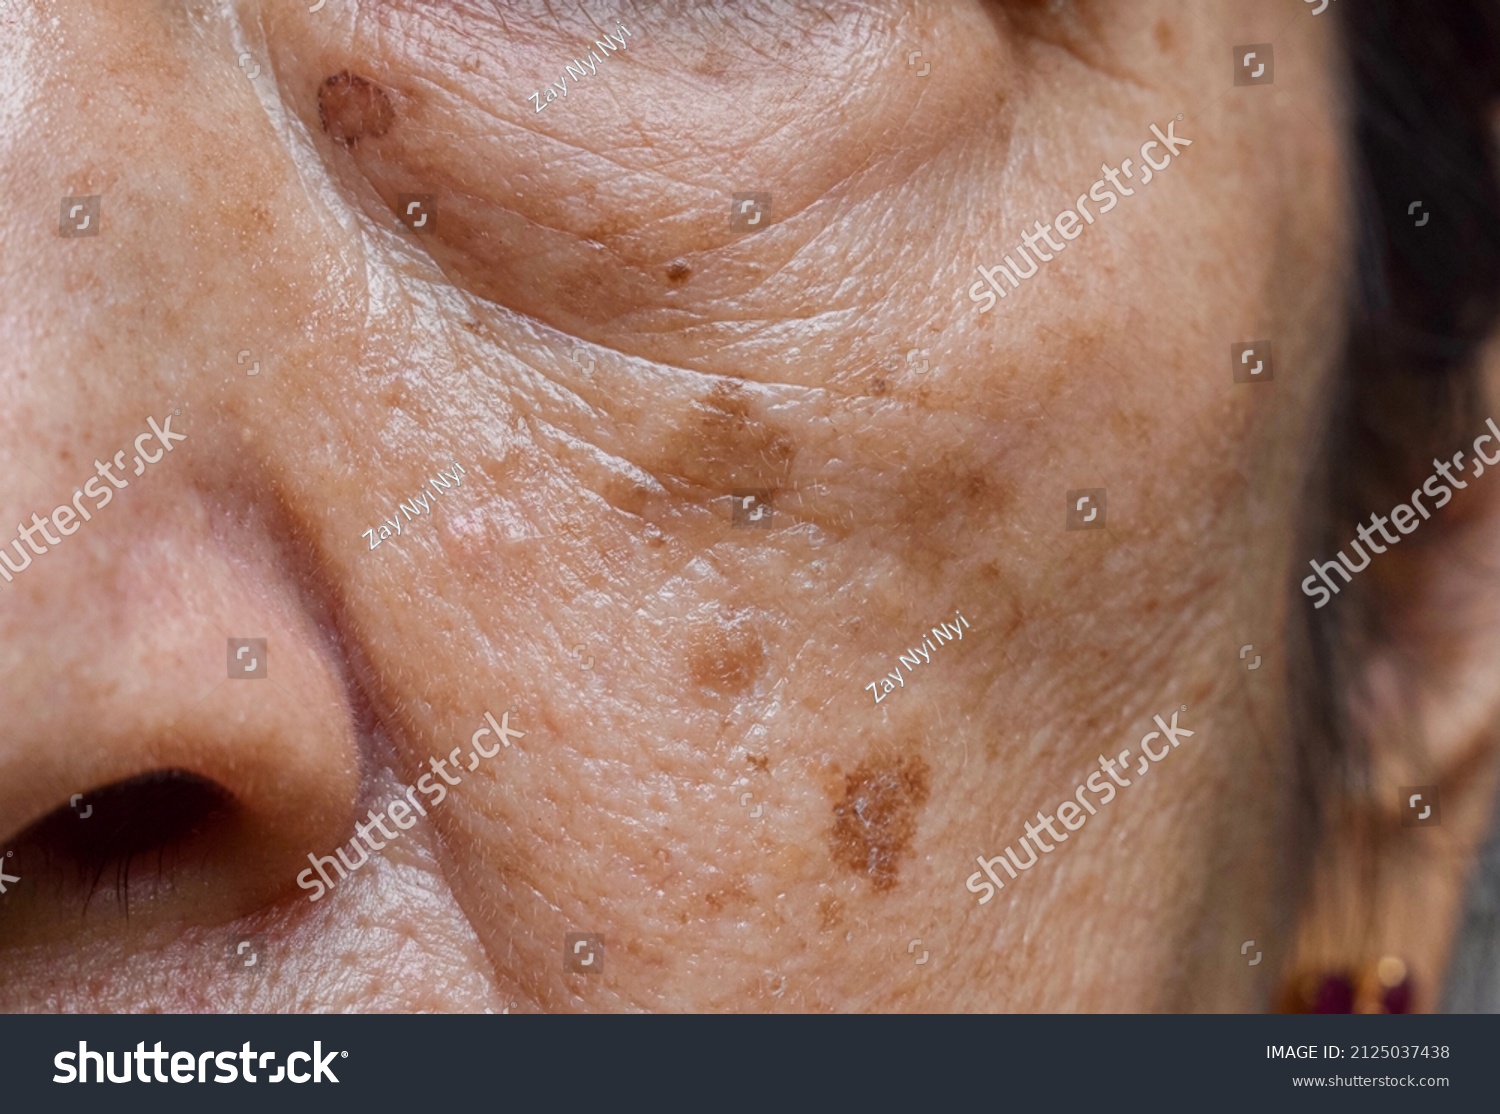 Small brown patches called age spots on face of Asian elder woman. They are also called liver spots, senile lentigo, or sun spots. Closeup view. #2125037438